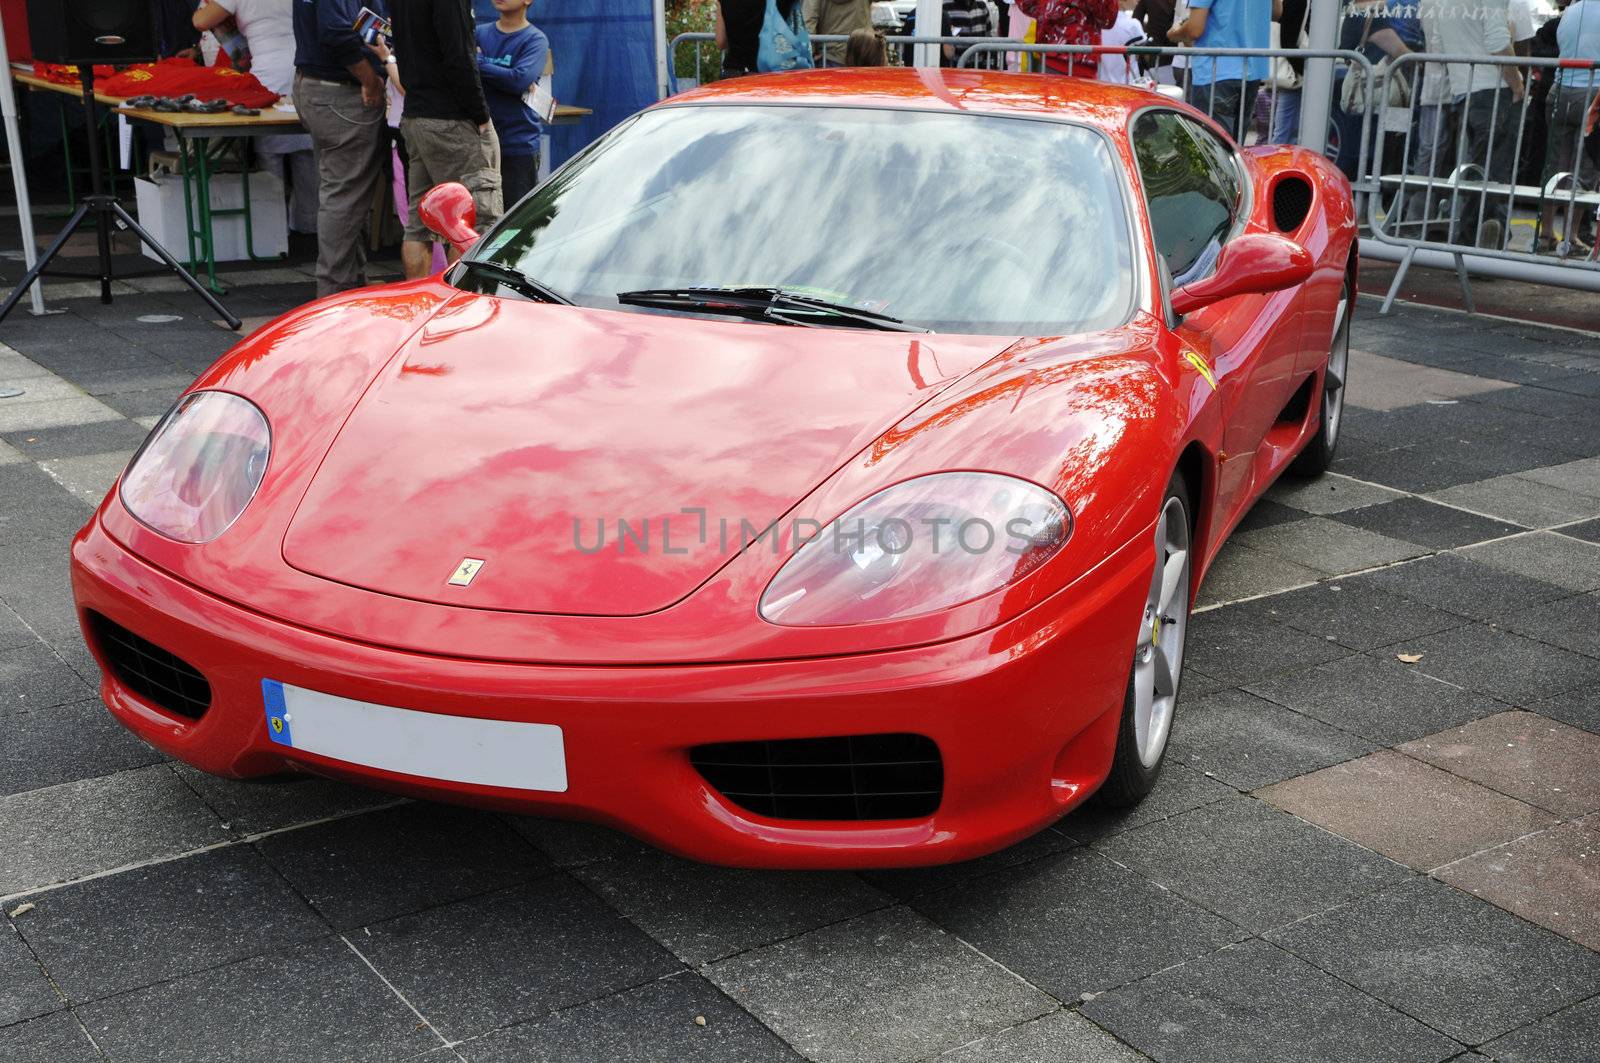 Front view of a Modena Ferrari by shkyo30